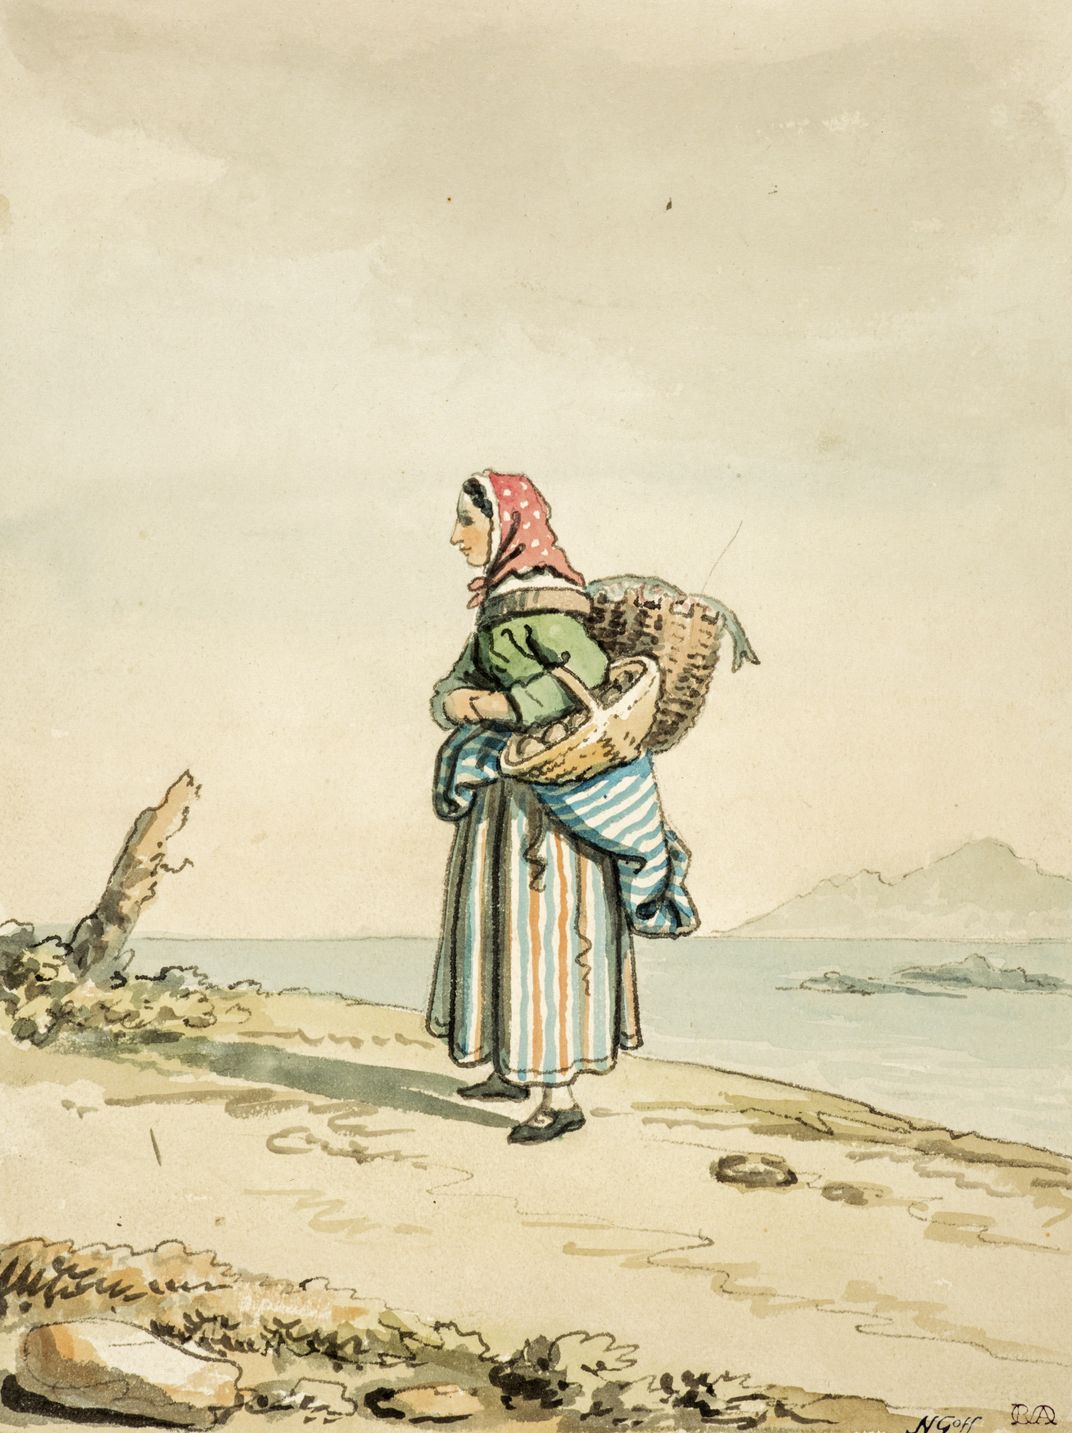 See a Rare Watercolor of a Black Woman Living in Edinburgh in the Late 18th Century